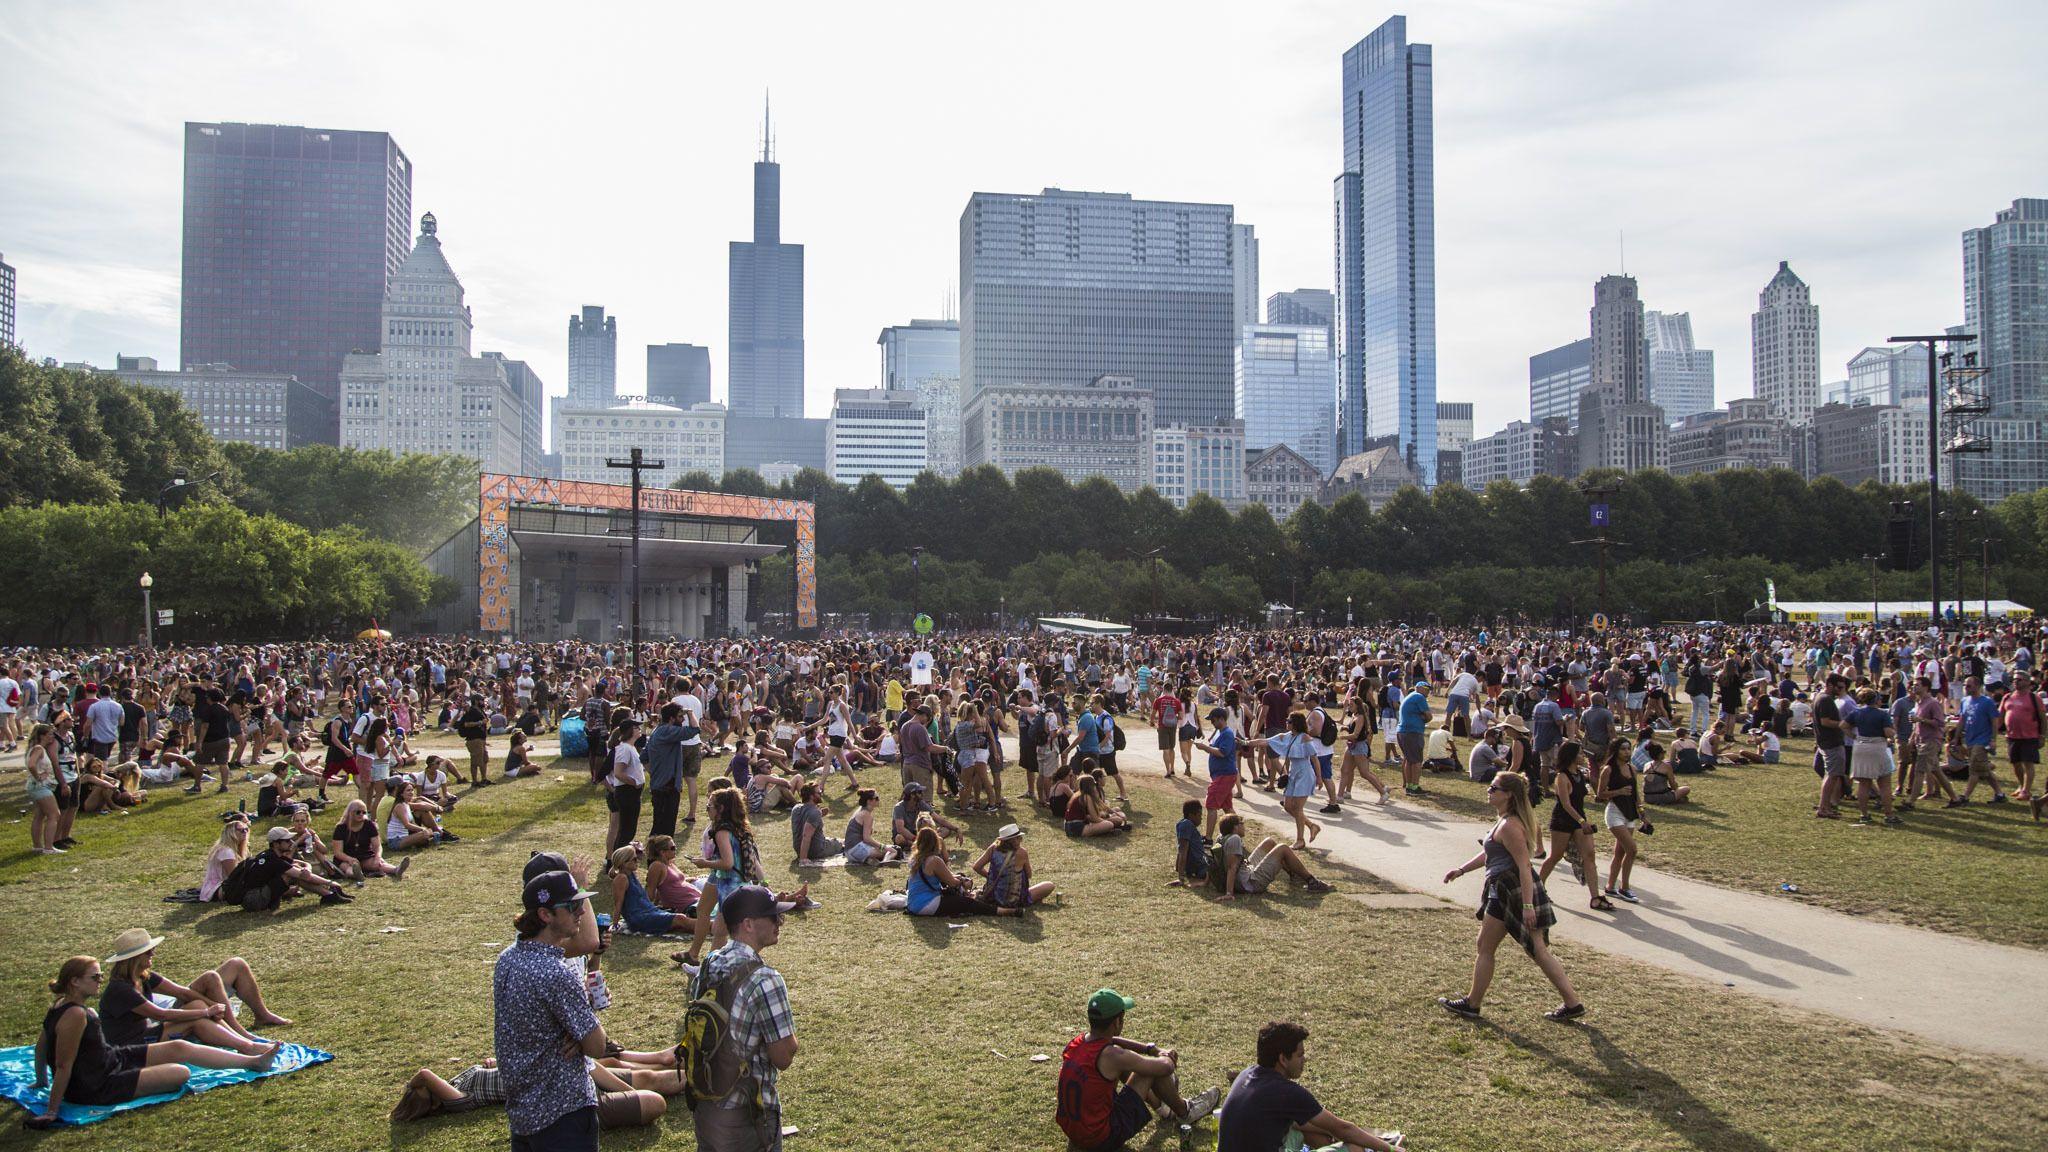 Your guide to Lollapalooza 2018 summer music festival